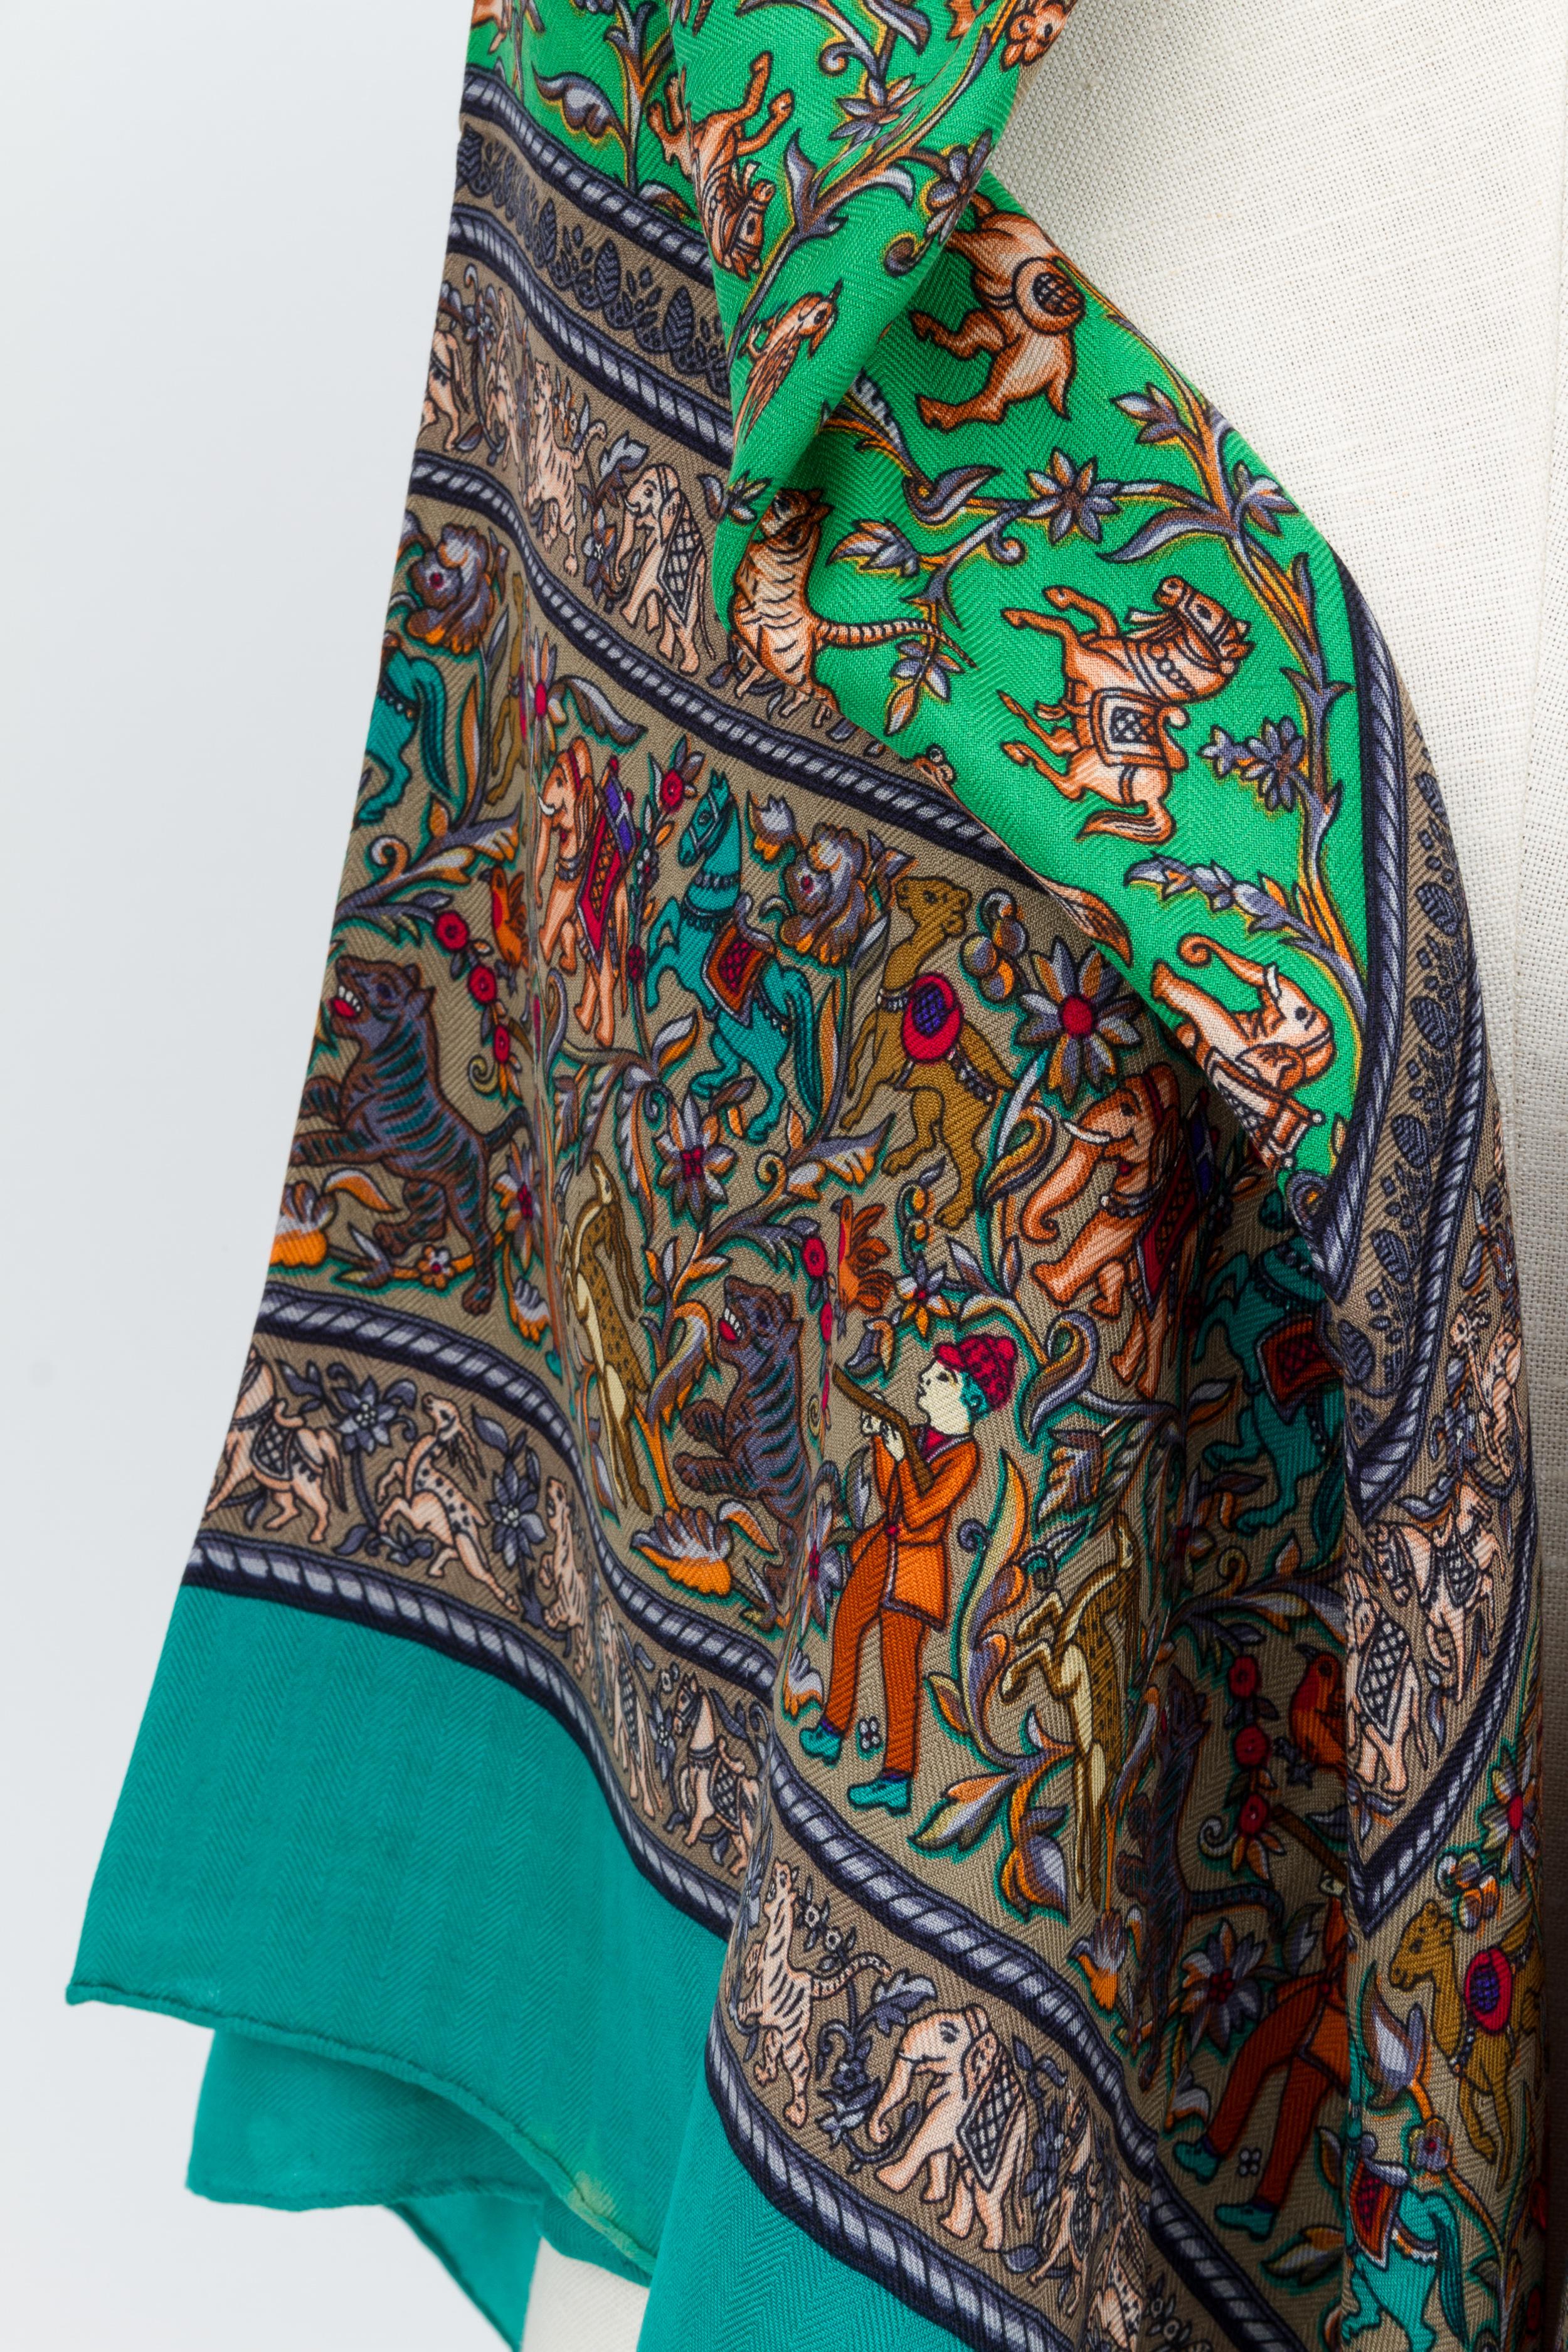 Hermès Chasse en Inde casher shawl, Green and teal color combination . Please refer to photo for fading in one corner .